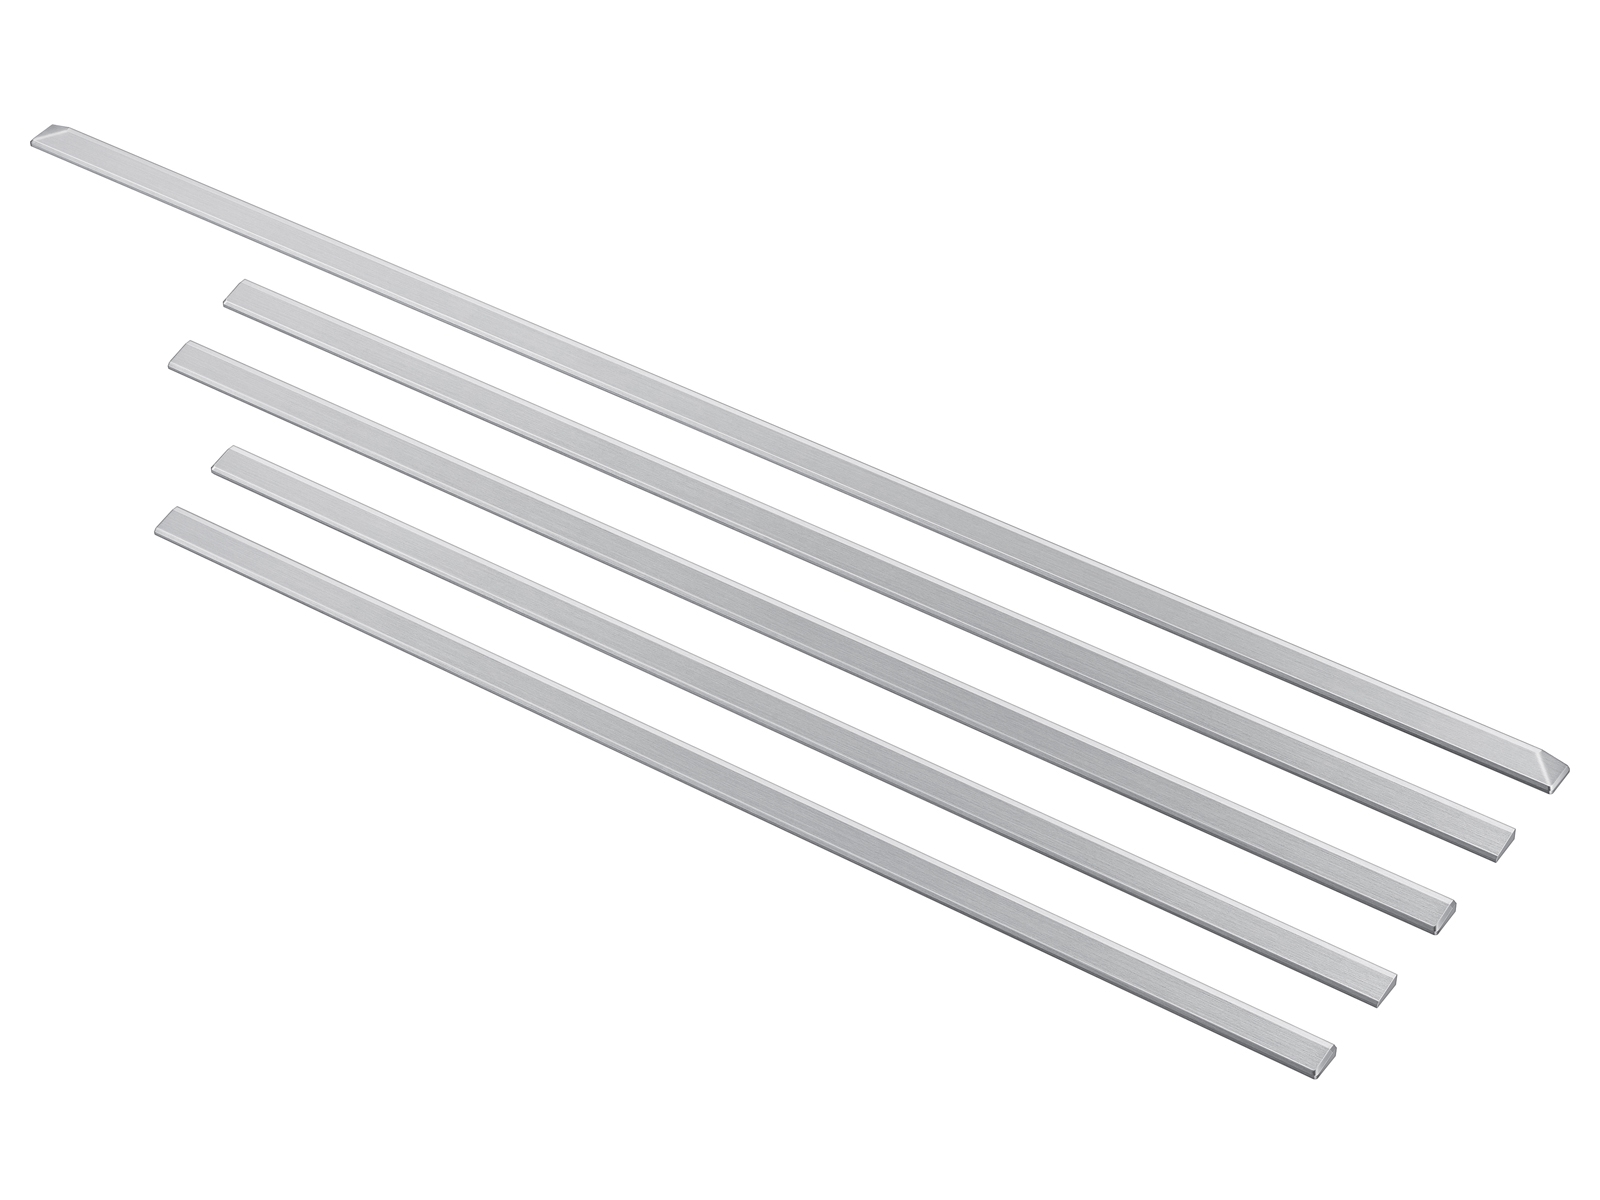 Thumbnail image of Trim Kit for 30” Slide in Range, 5 piece in Stainless Steel